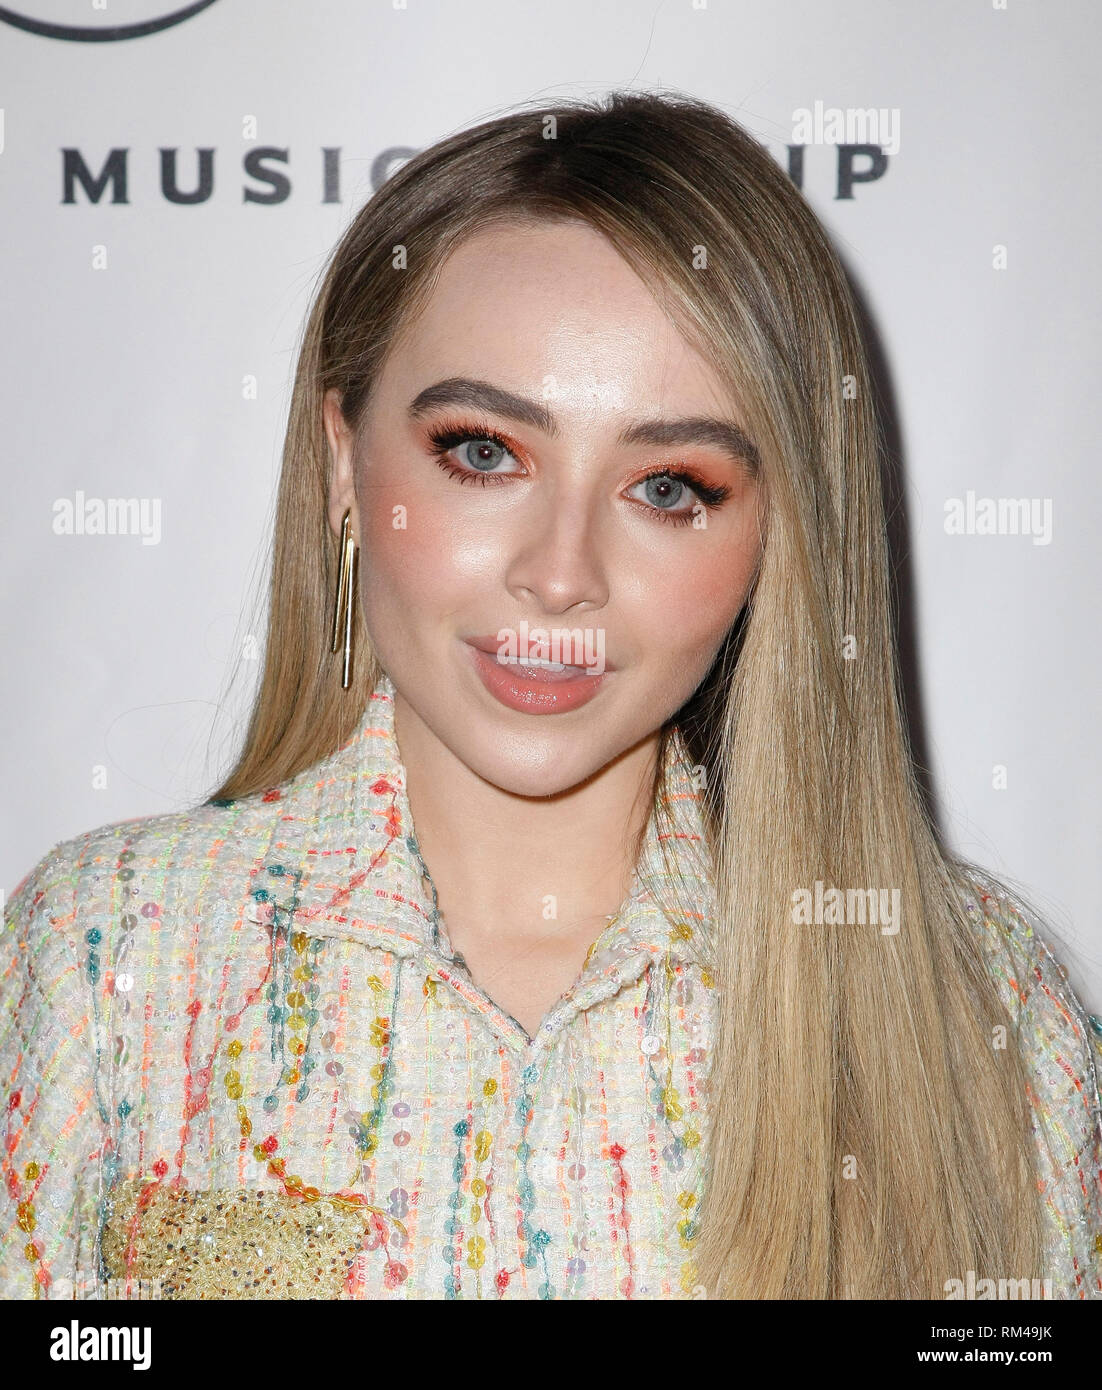 Los Angeles Ca February 10 Sabrina Carpenter Attends Universal Music Groups 2019 After Party At The Row Dtla On February 9 2019 In Los Angeles California Photo Crashimagespace RM49JK 